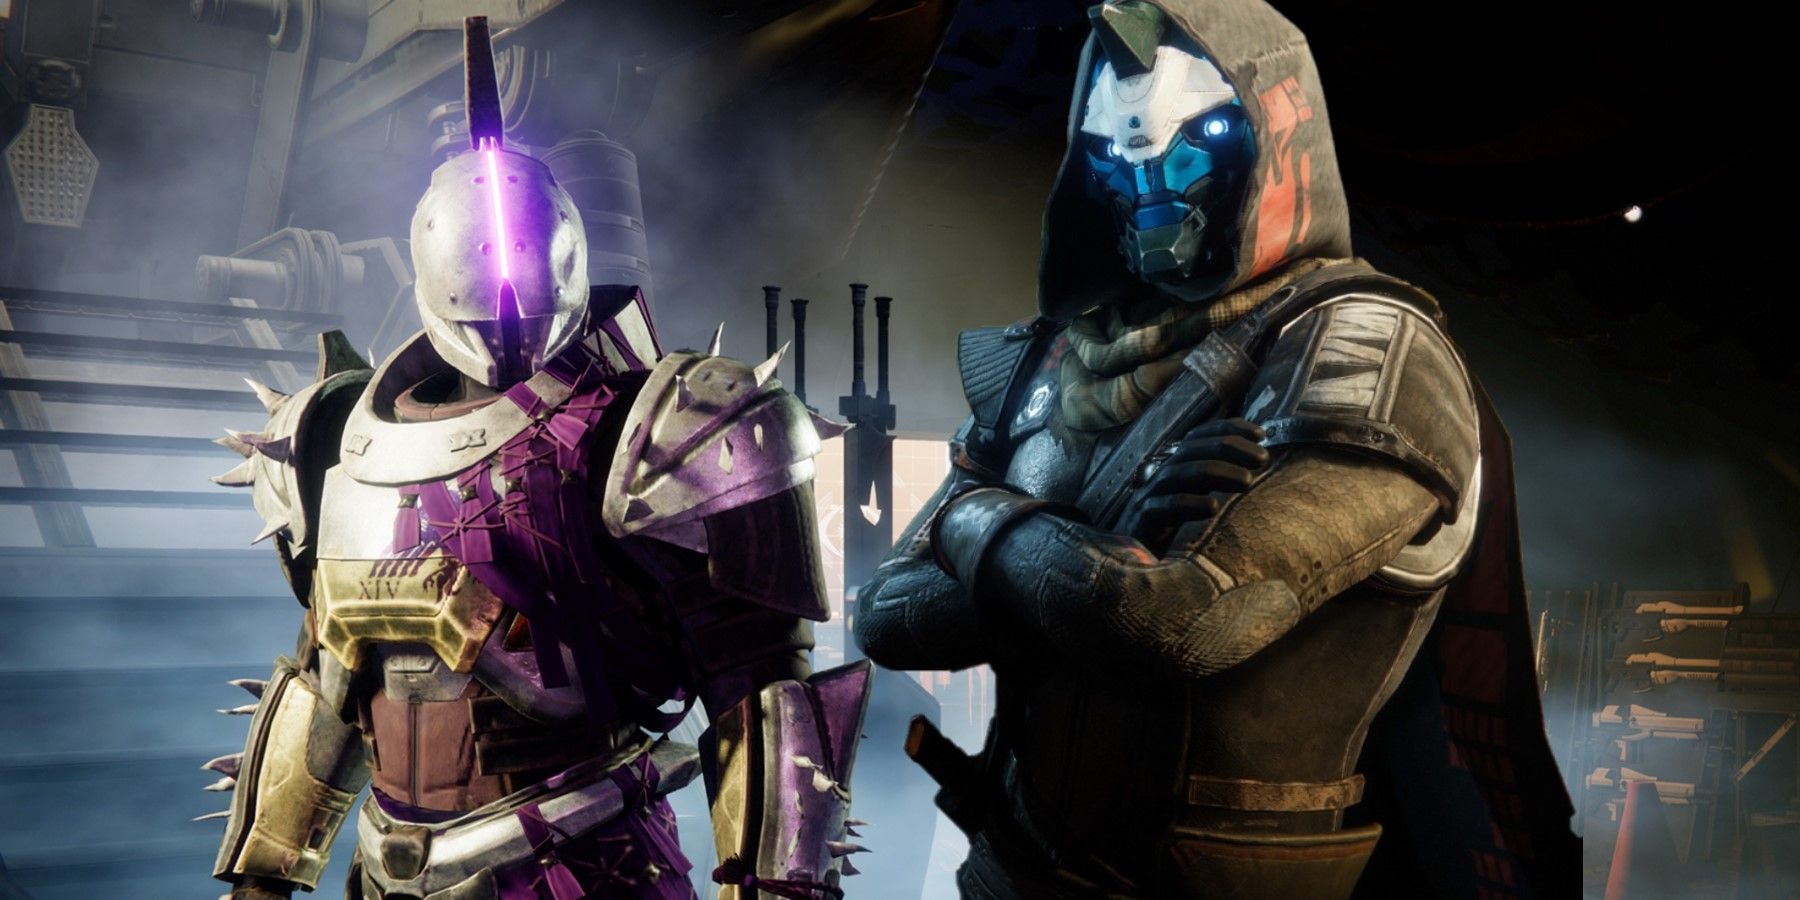 destiny 2 community votes saint-14 best character in poll elimination series reddit cayde third place savathun seventh place